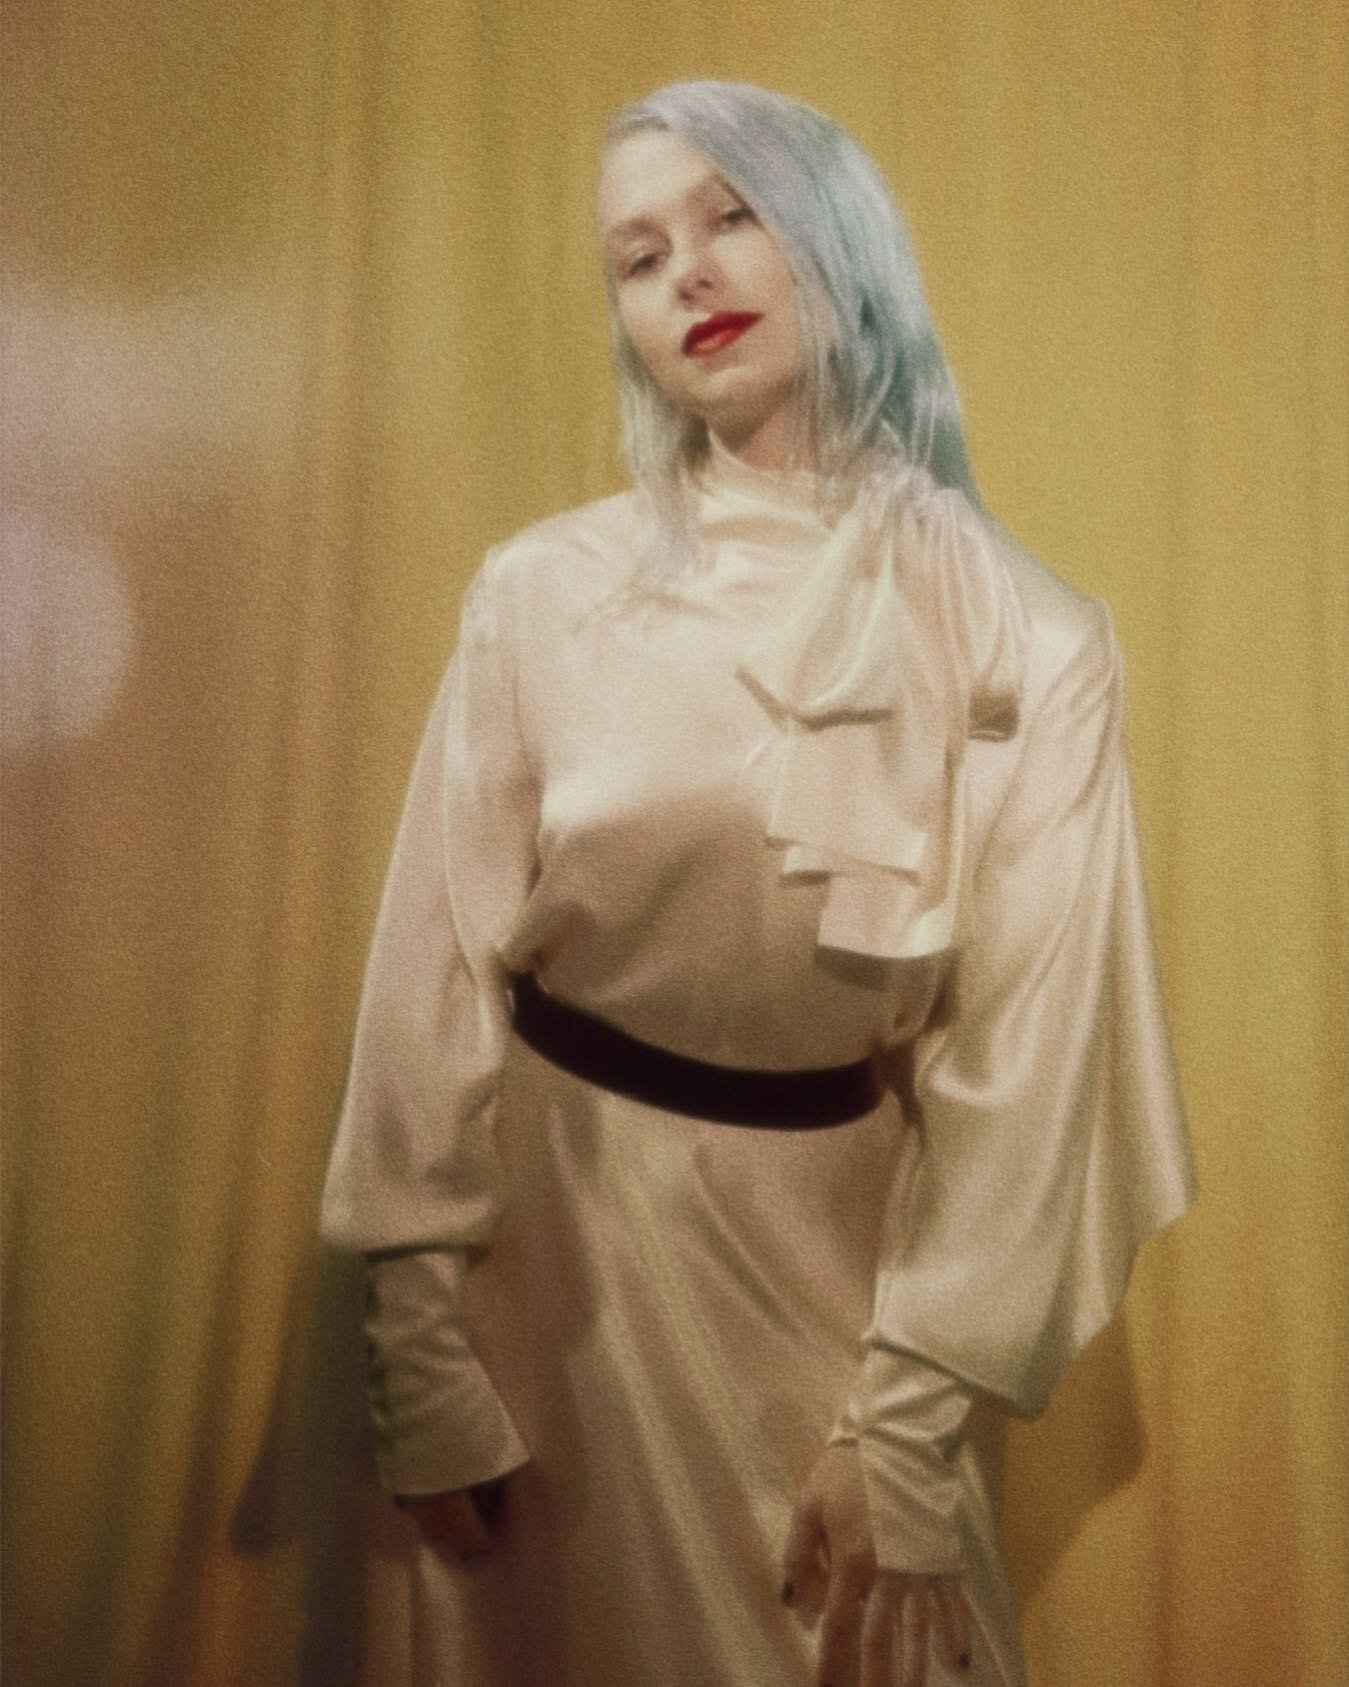 Film outtake of @phoebebridgers for @variety 💛